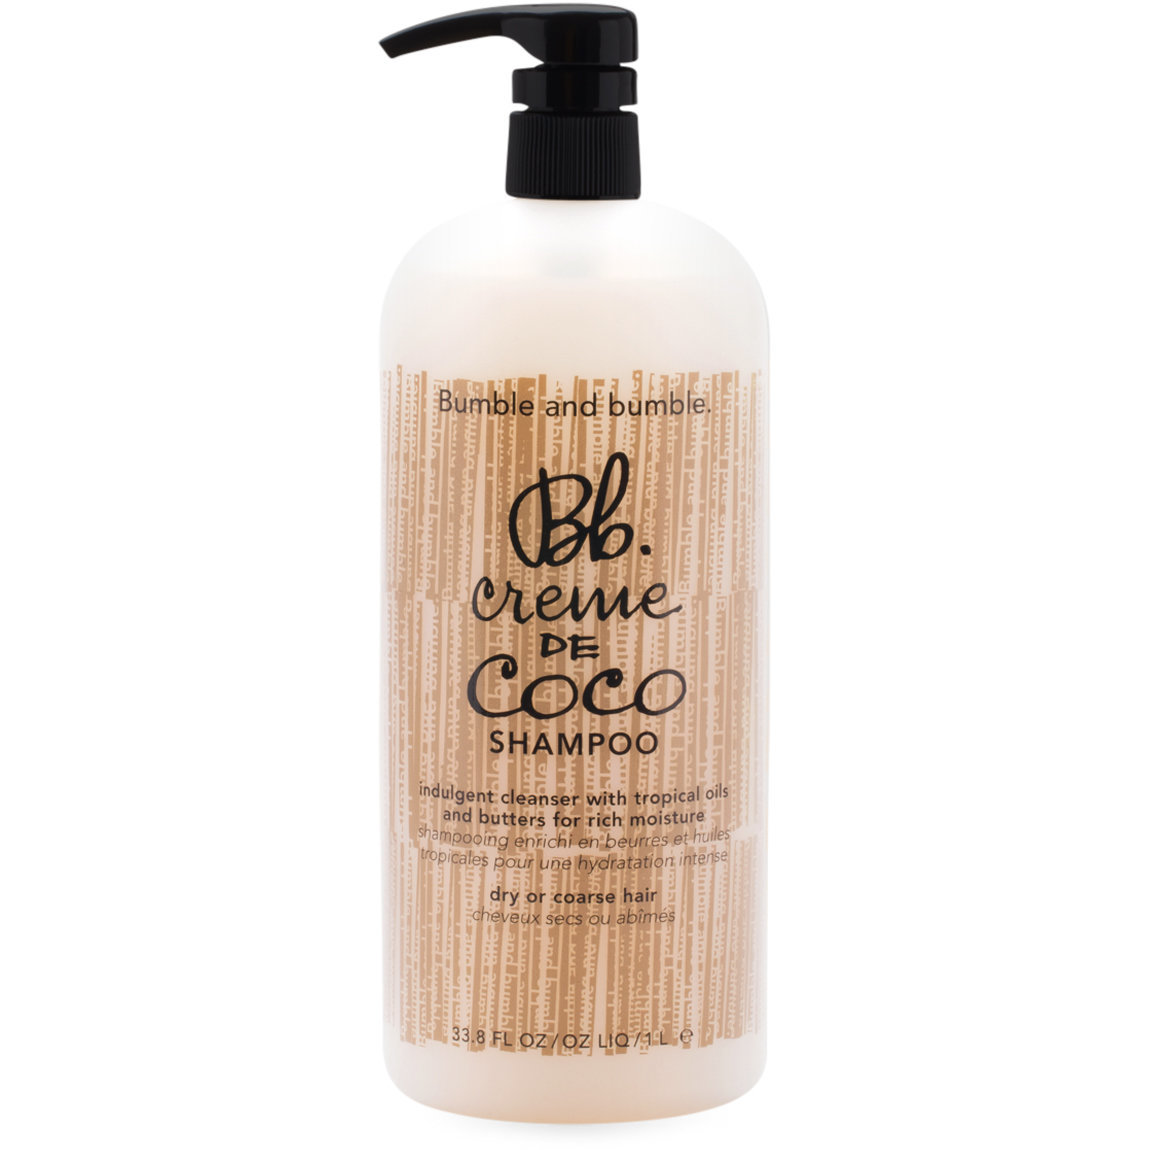 Bumble and bumble. Creme de Coco Shampoo 1 L alternative view 1 - product swatch.